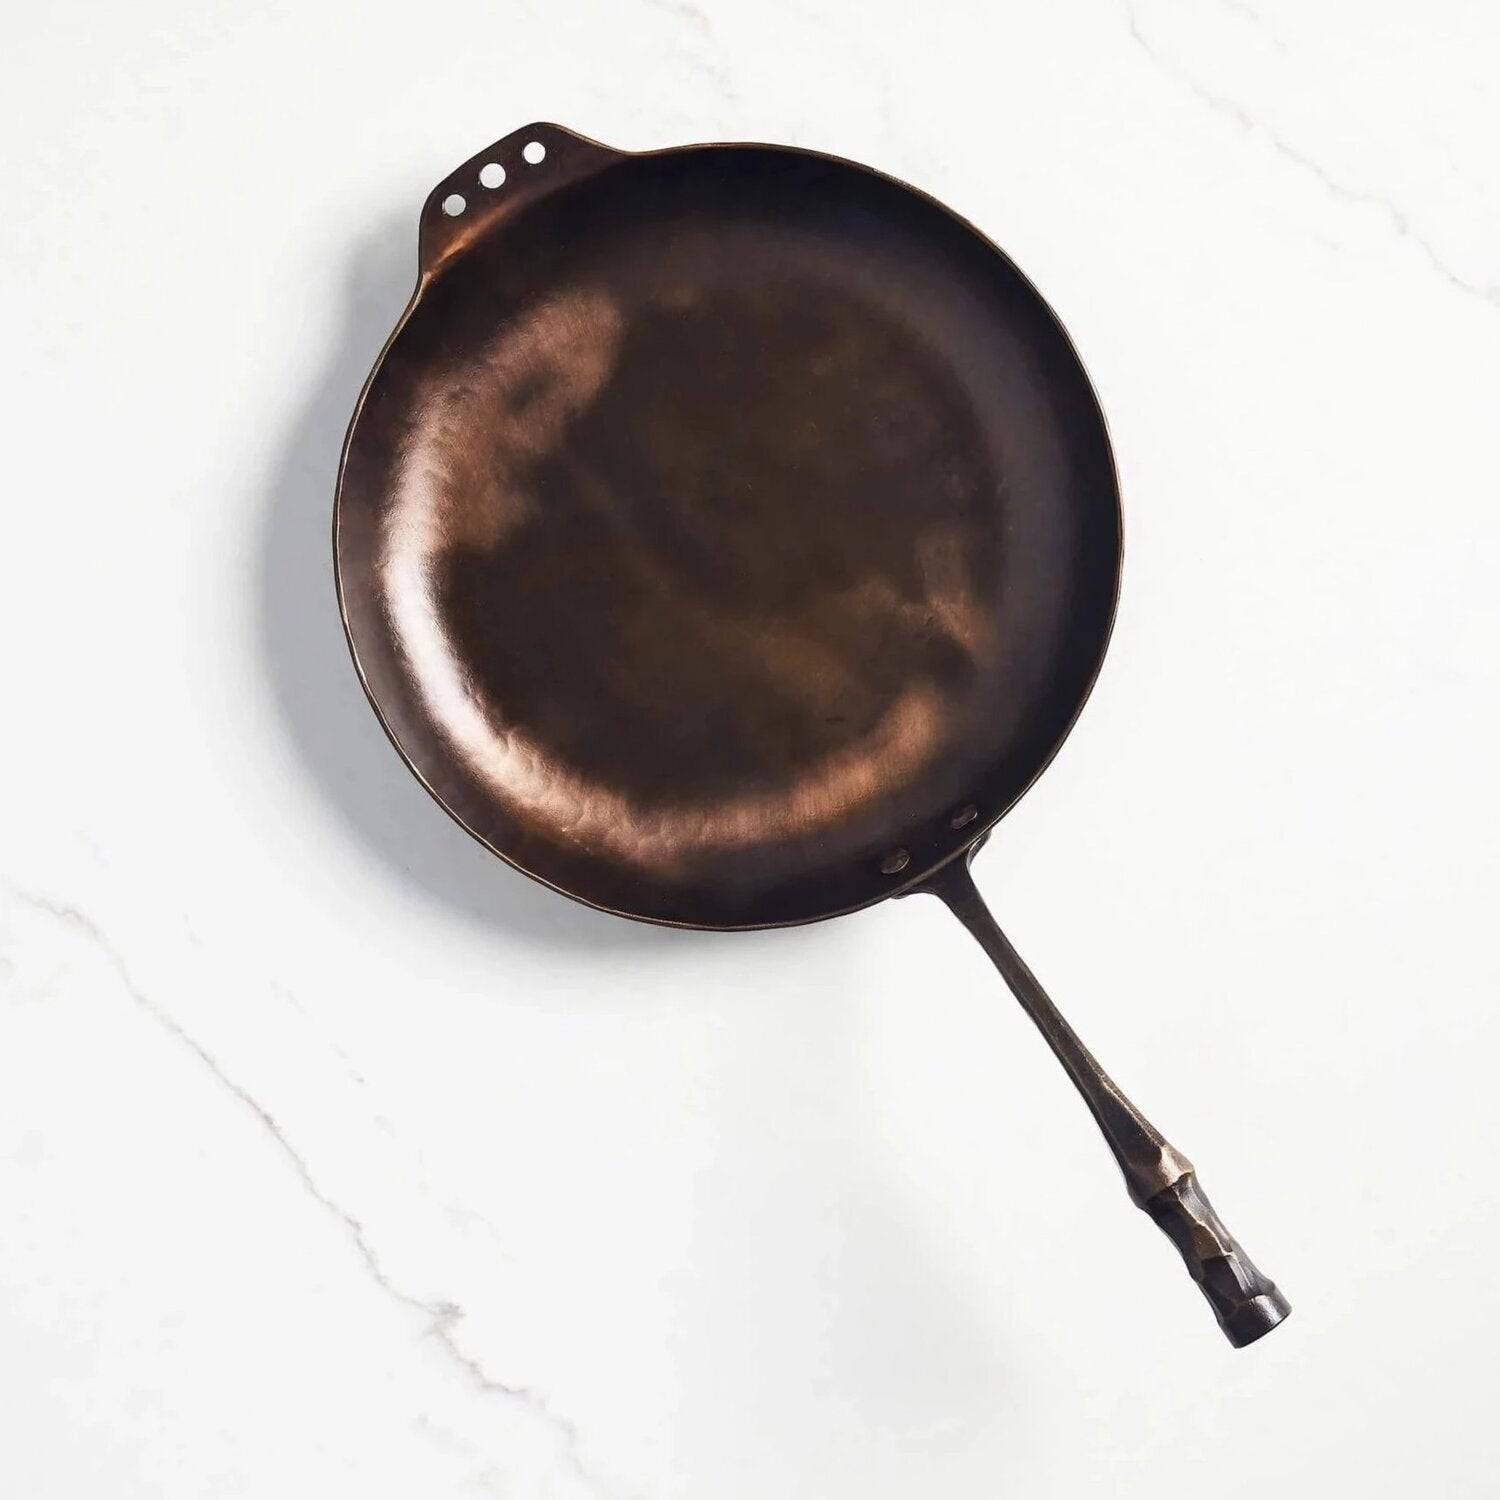 Smithey Cast-Iron Traditional Skillet